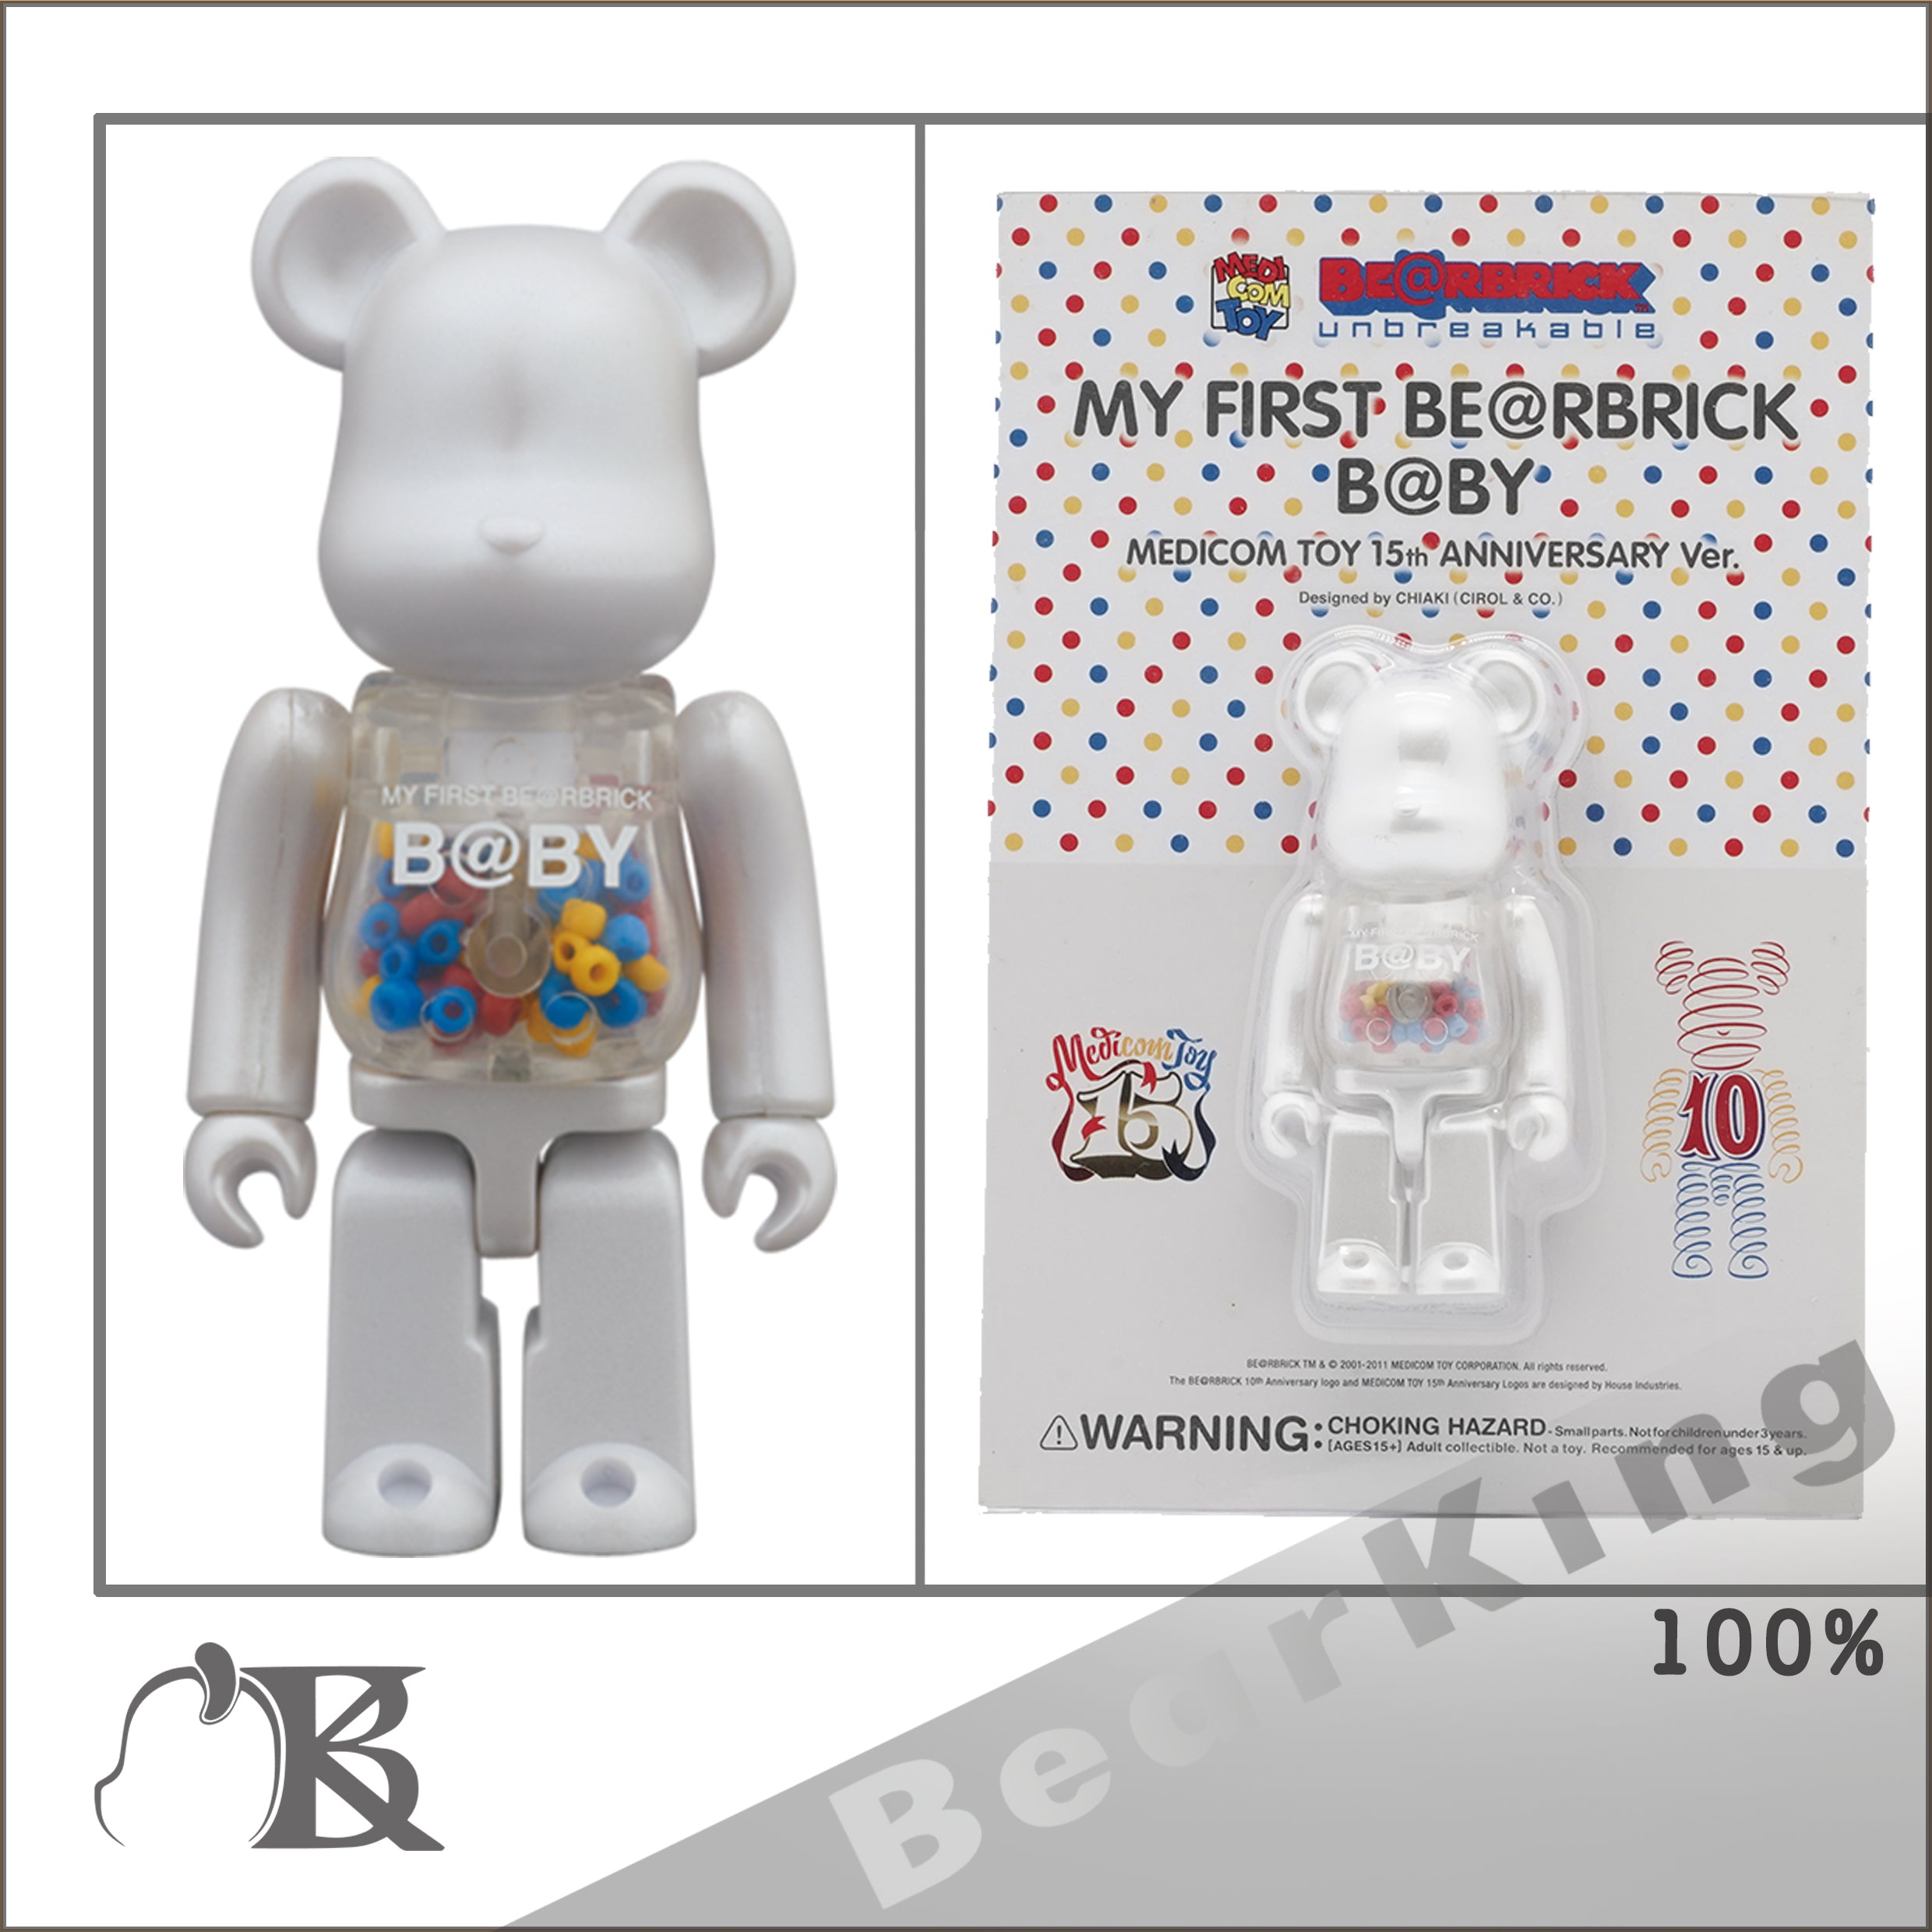 MY FIRST BE@RBRICK B@BY （MCT 15th Anniversary Ver.）100% 千秋 Baby 15周年